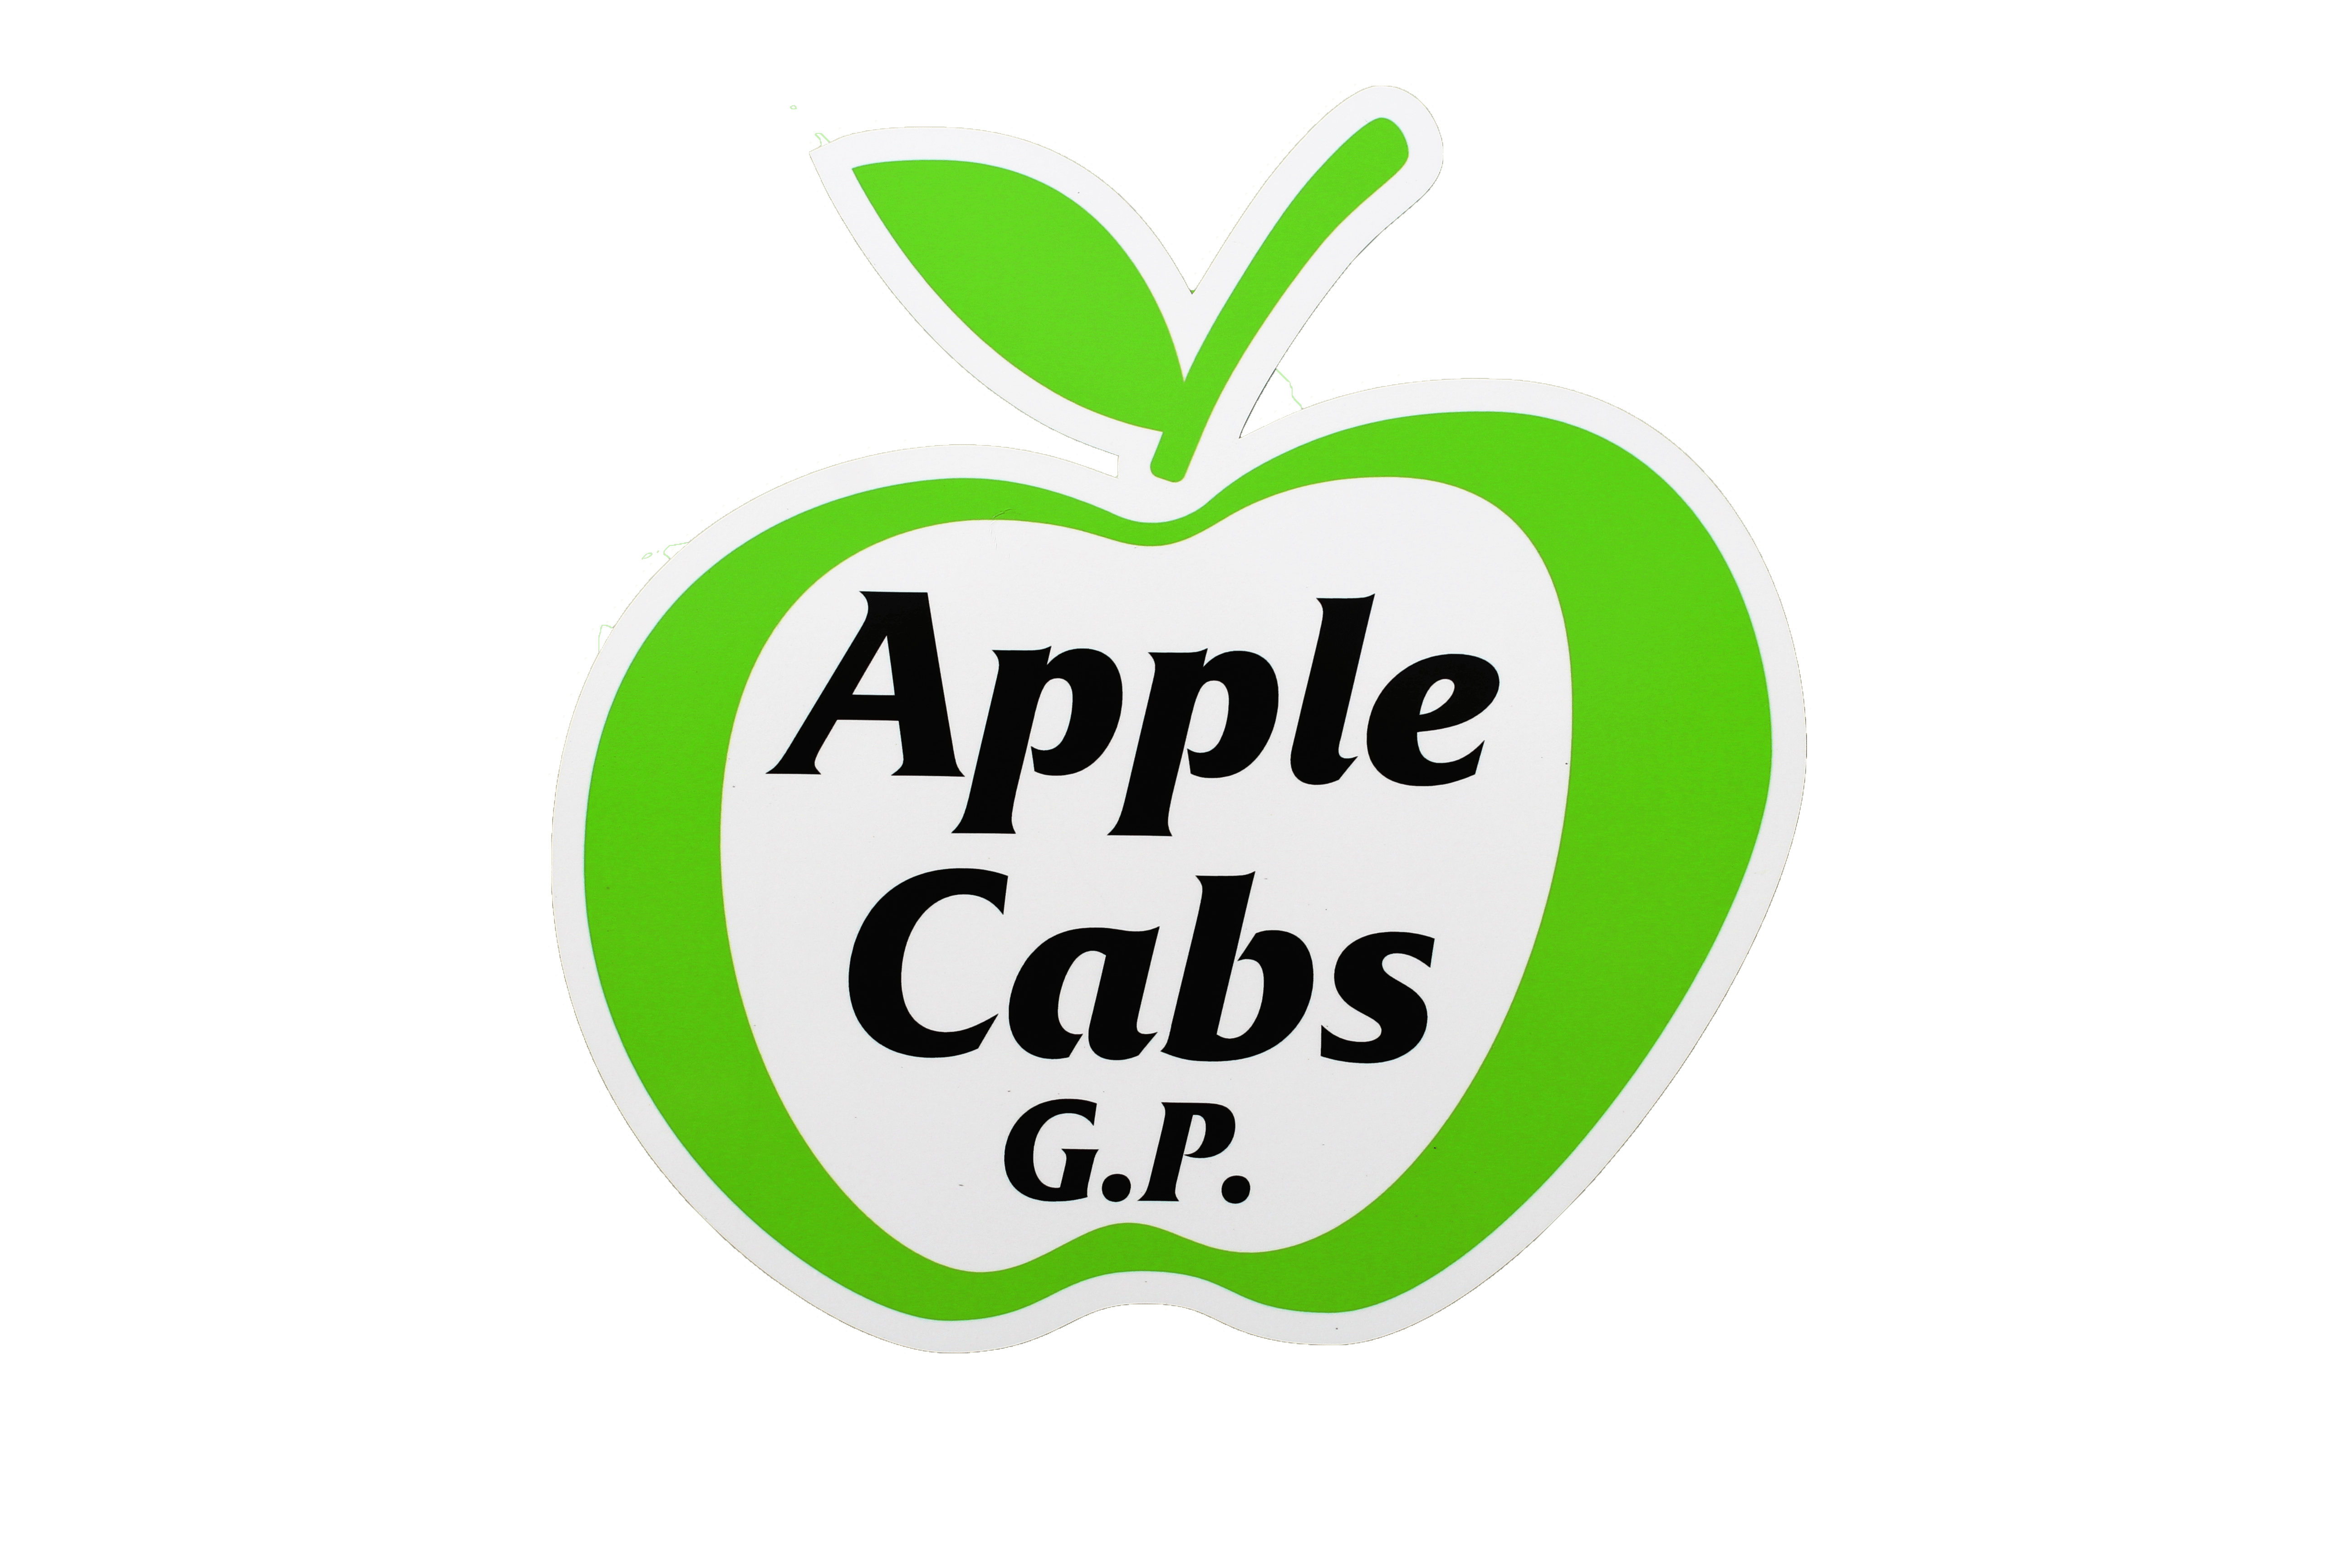 Apple Cabs